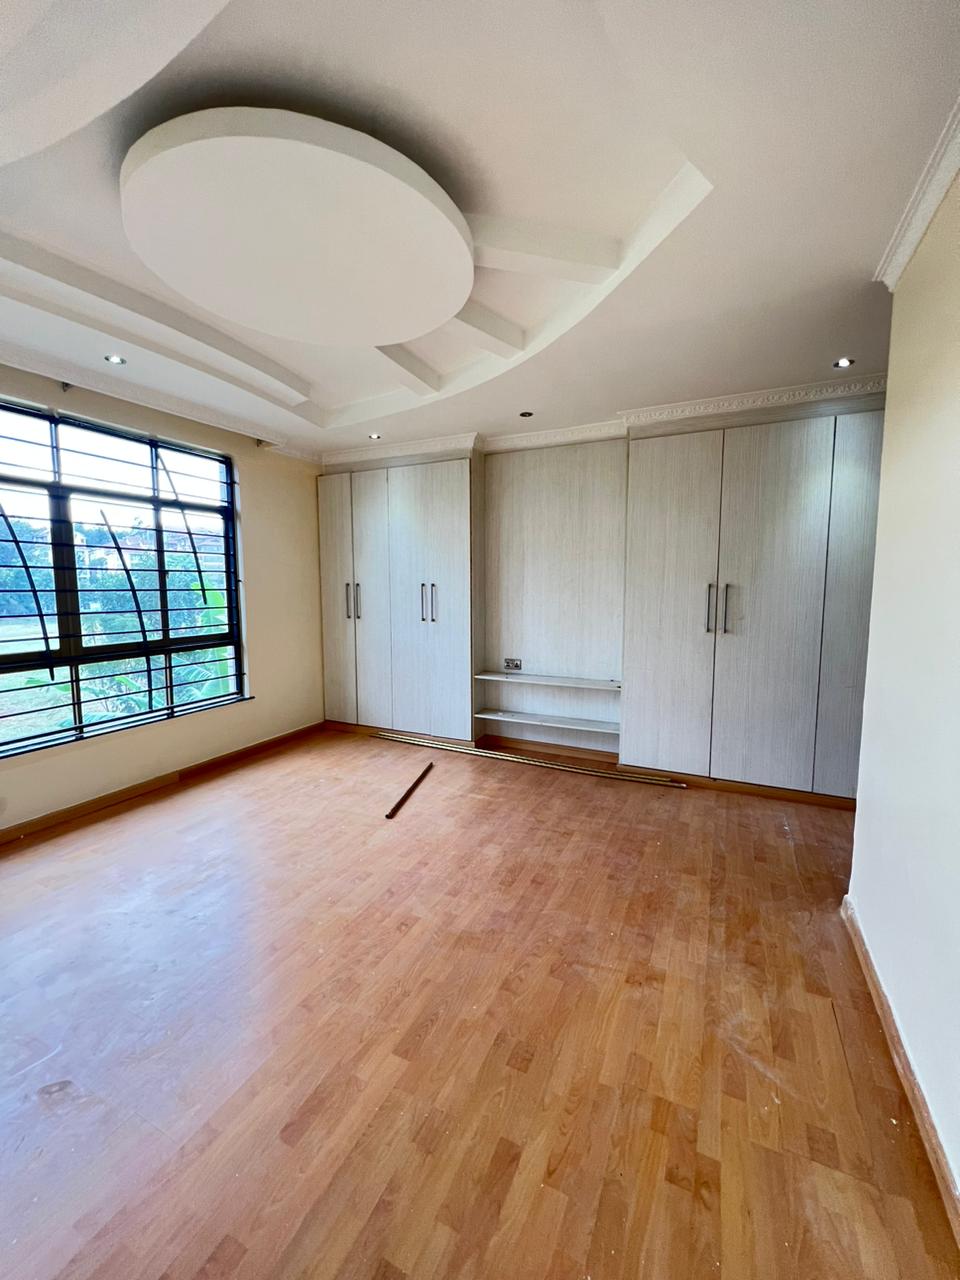 Spacious modern 3 bedroom plus dsq apartment to let in Kileleshwa, Nairobi. All bedroom are en-suite. Rent per month 100K Musilli Homes Pam Golding. Hass Consult. GTC. Eighty Eighty Nairobi.